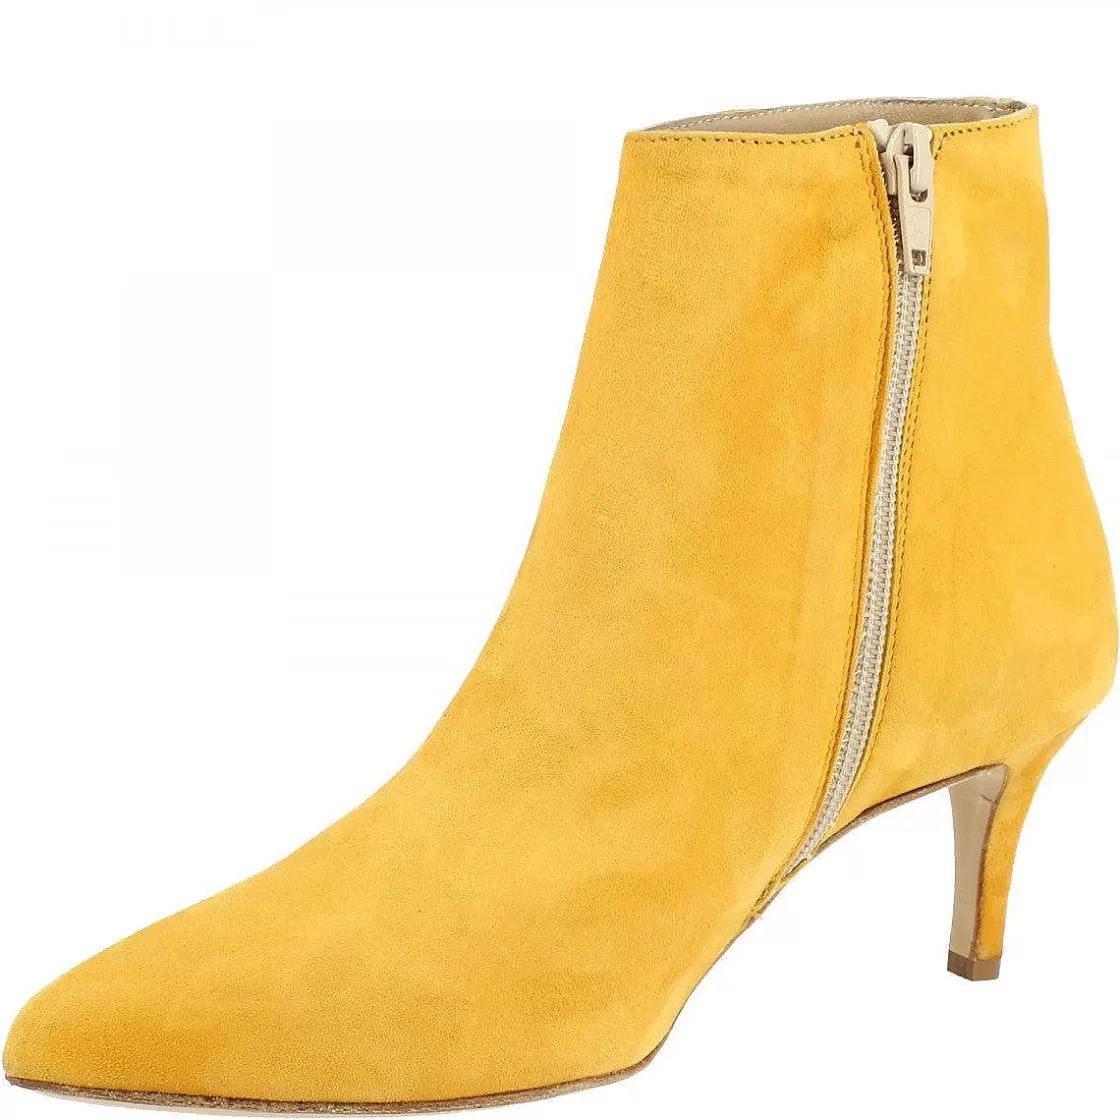 Leonardo Women'S Handmade Pointed Toe Heels Ankle Boots In Yellow Suede Leather Store